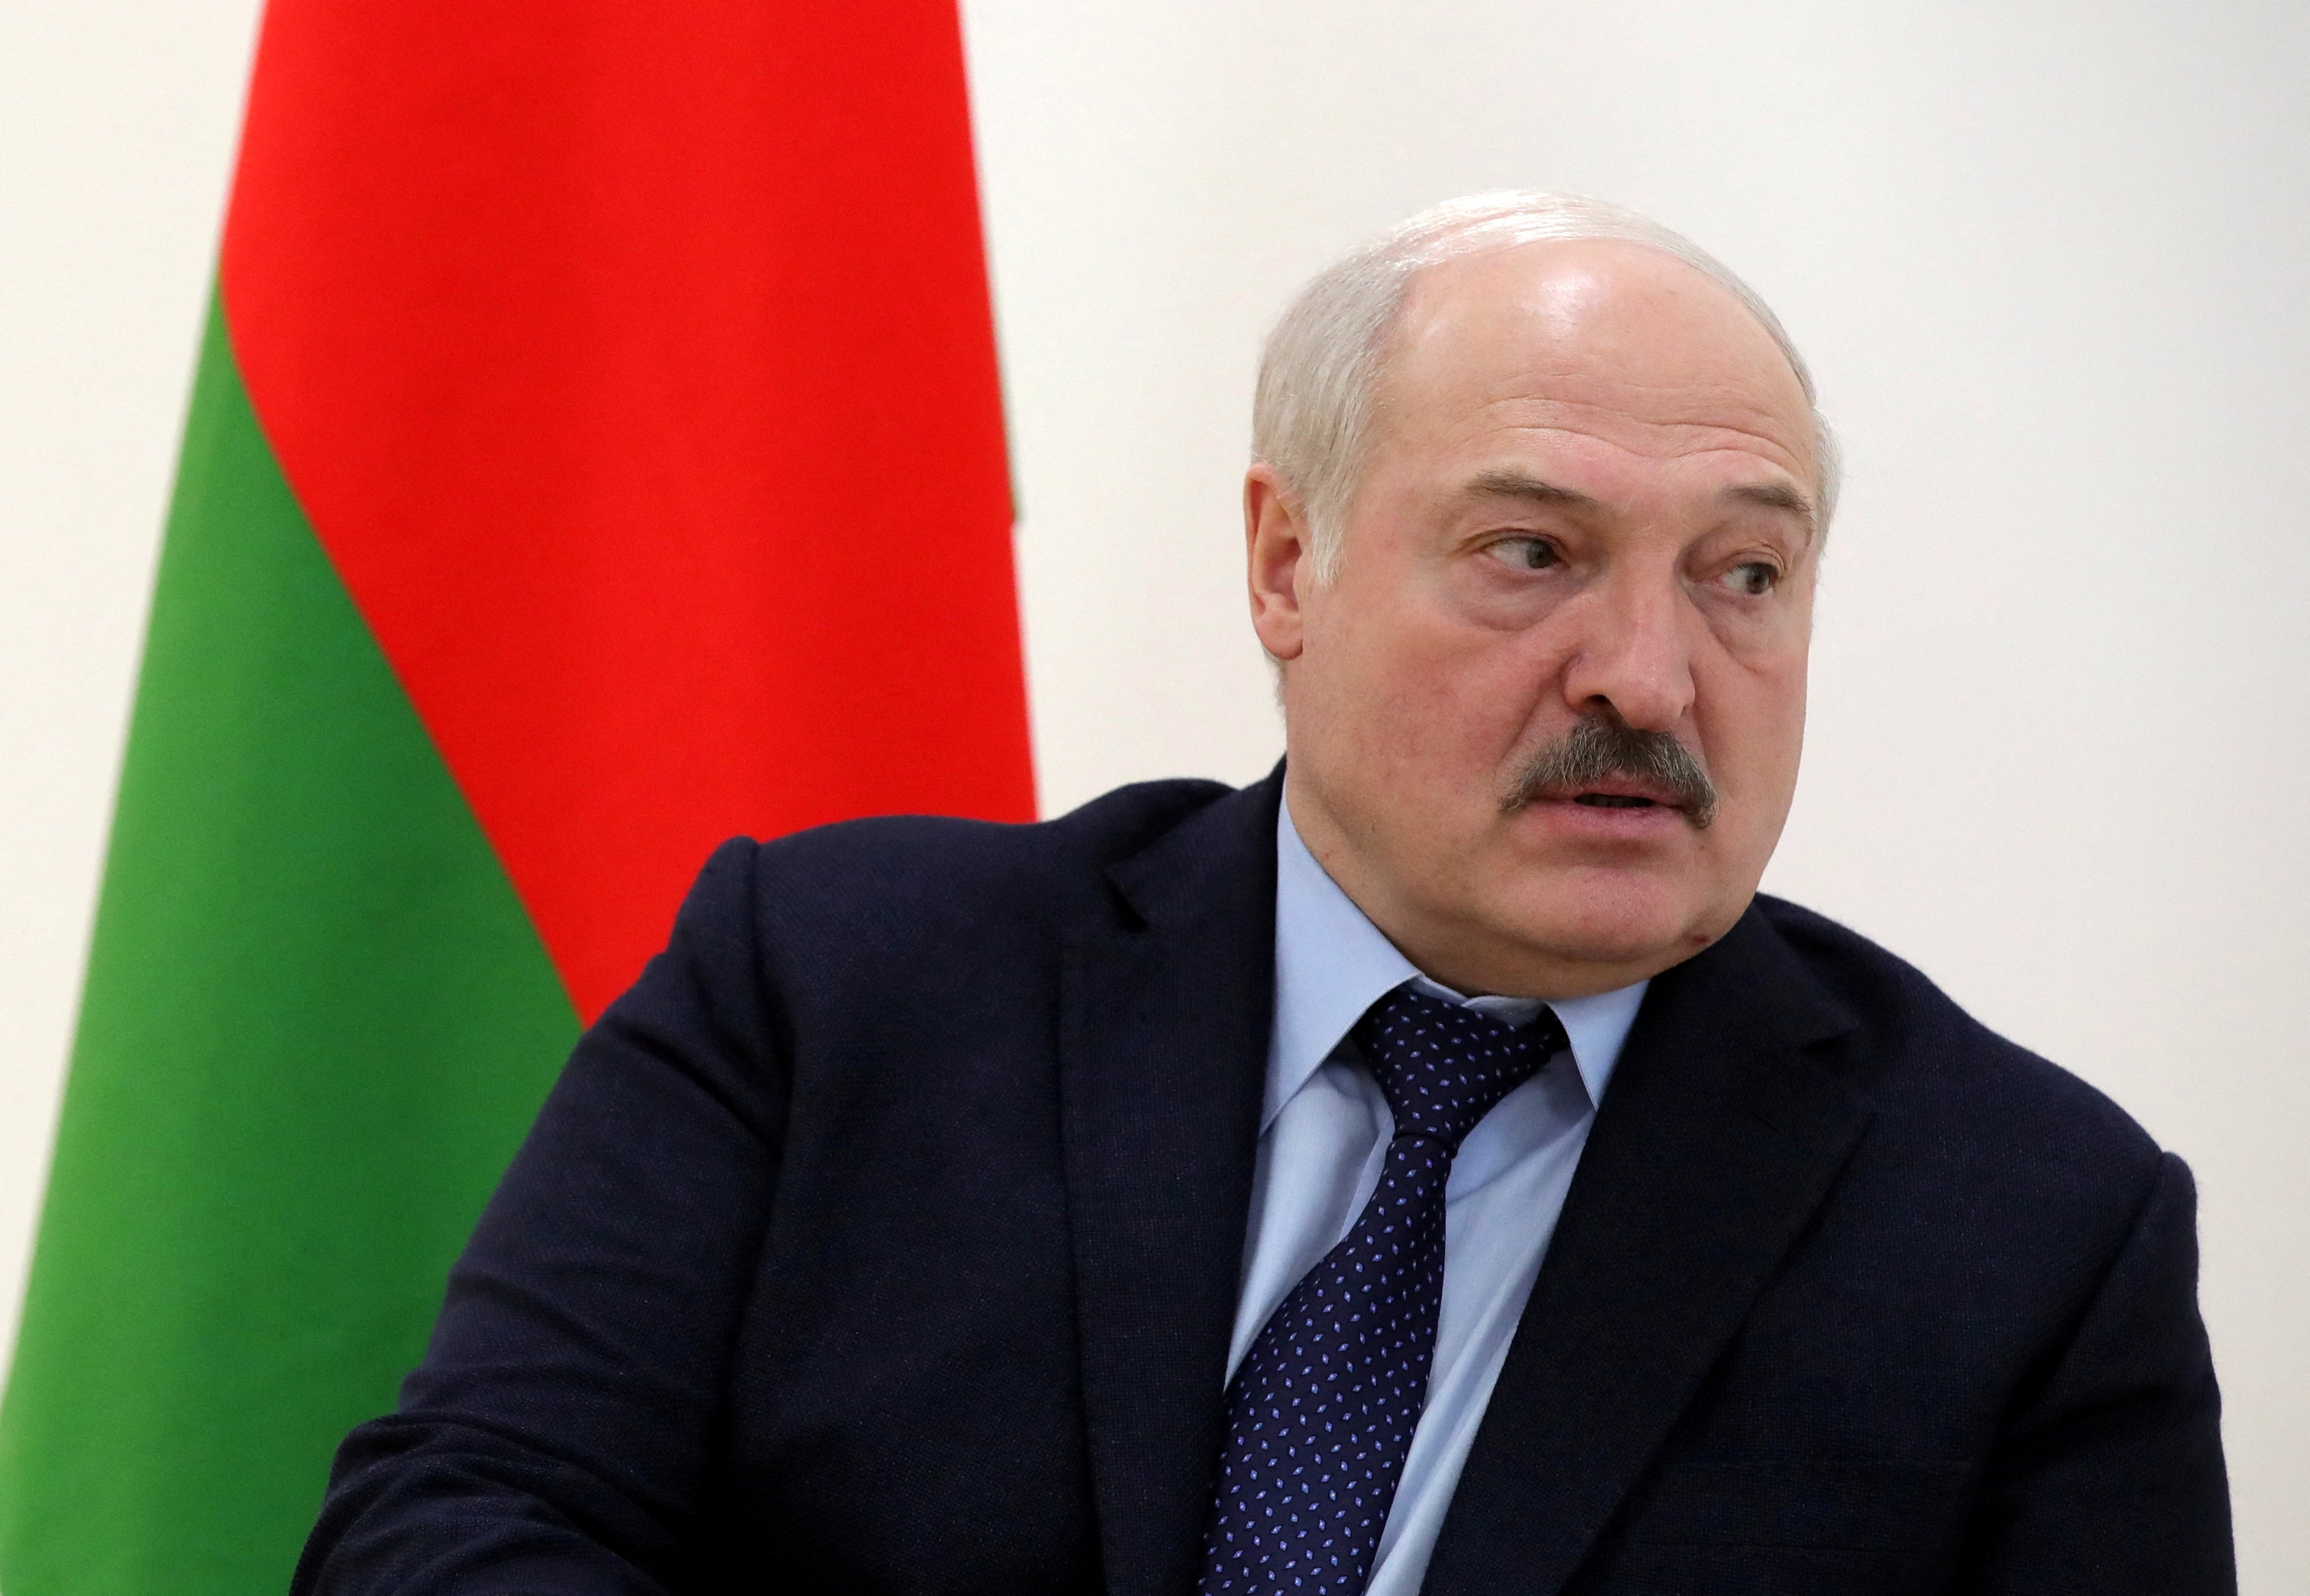 Belarusian president Alexander Lukashenko pictured during a meeting with Russian president Vladimir Putin in early April